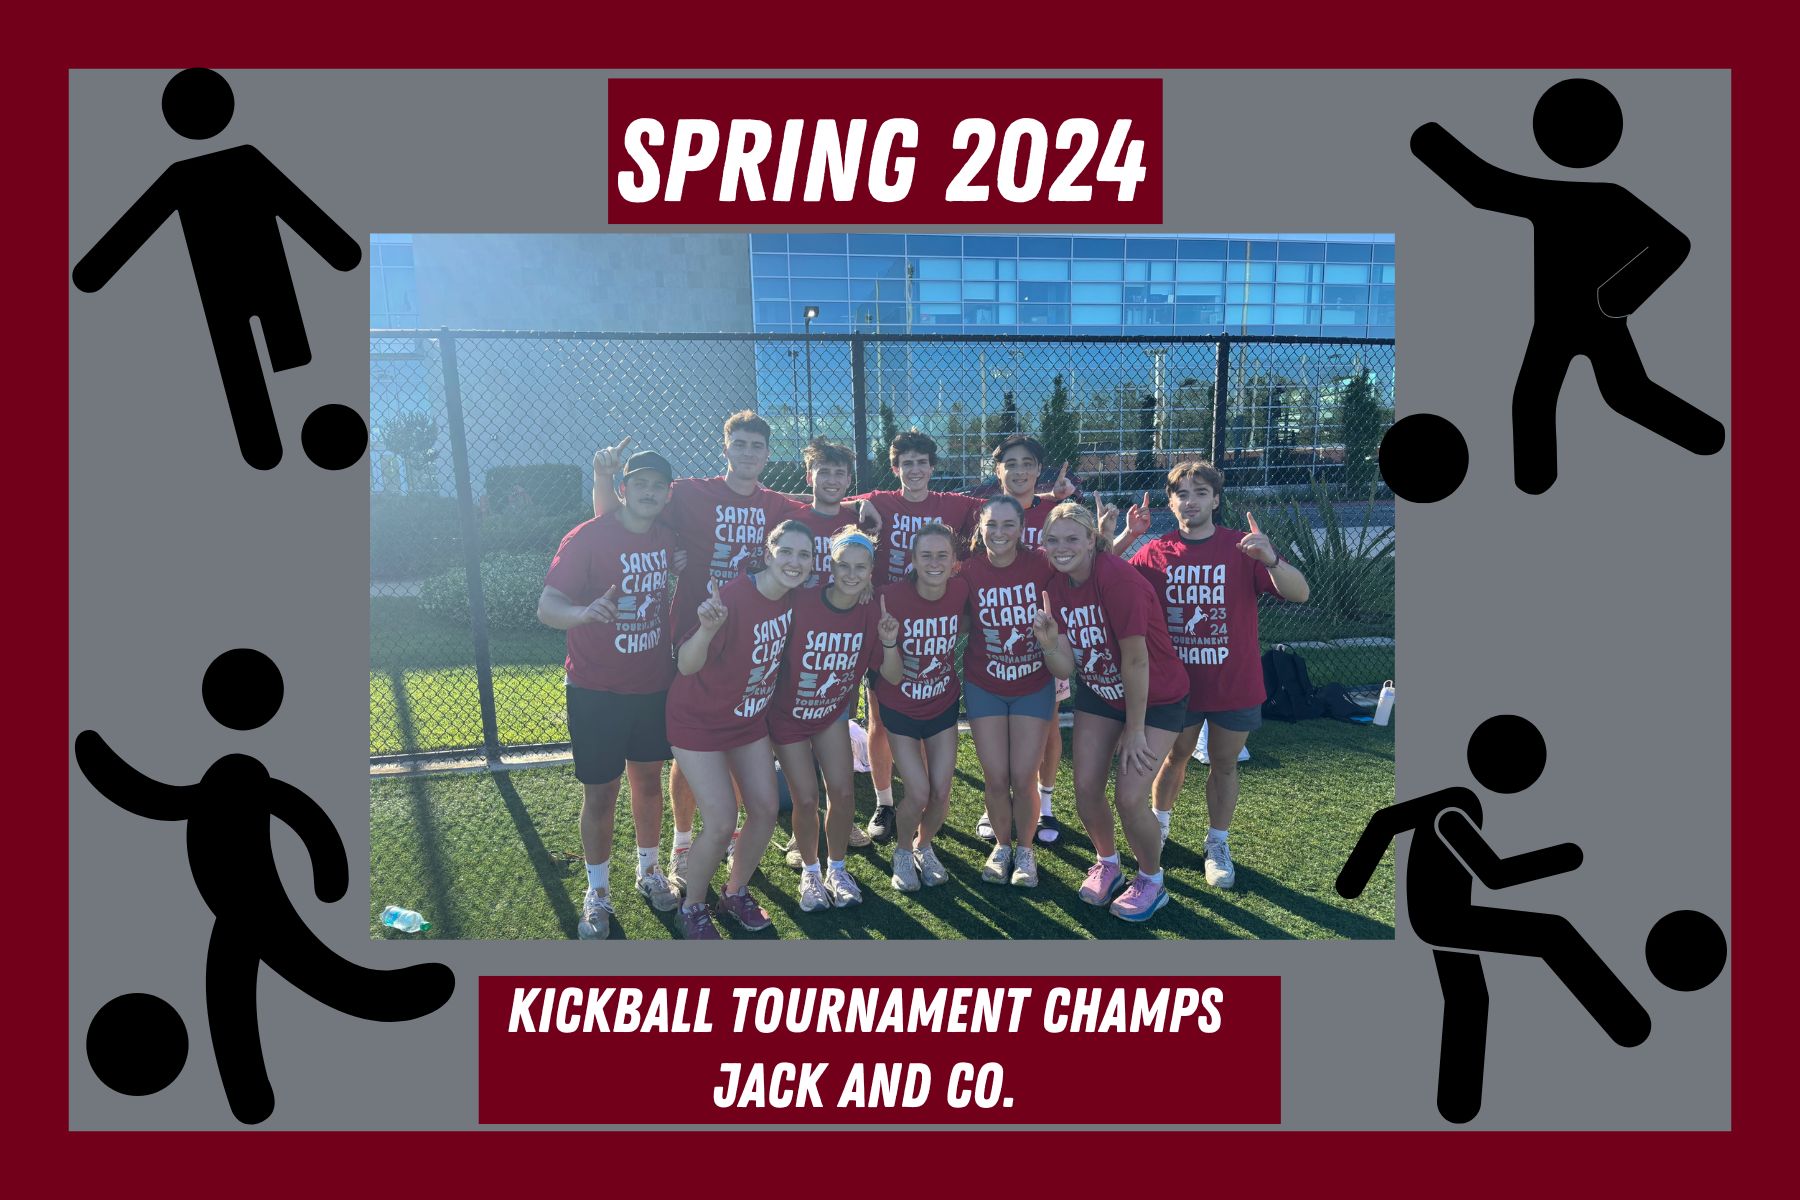 Photo of Jack and Co posing with their IM tournament champion t shirts on Bellomy Field after winning the IM Kickball tournament.